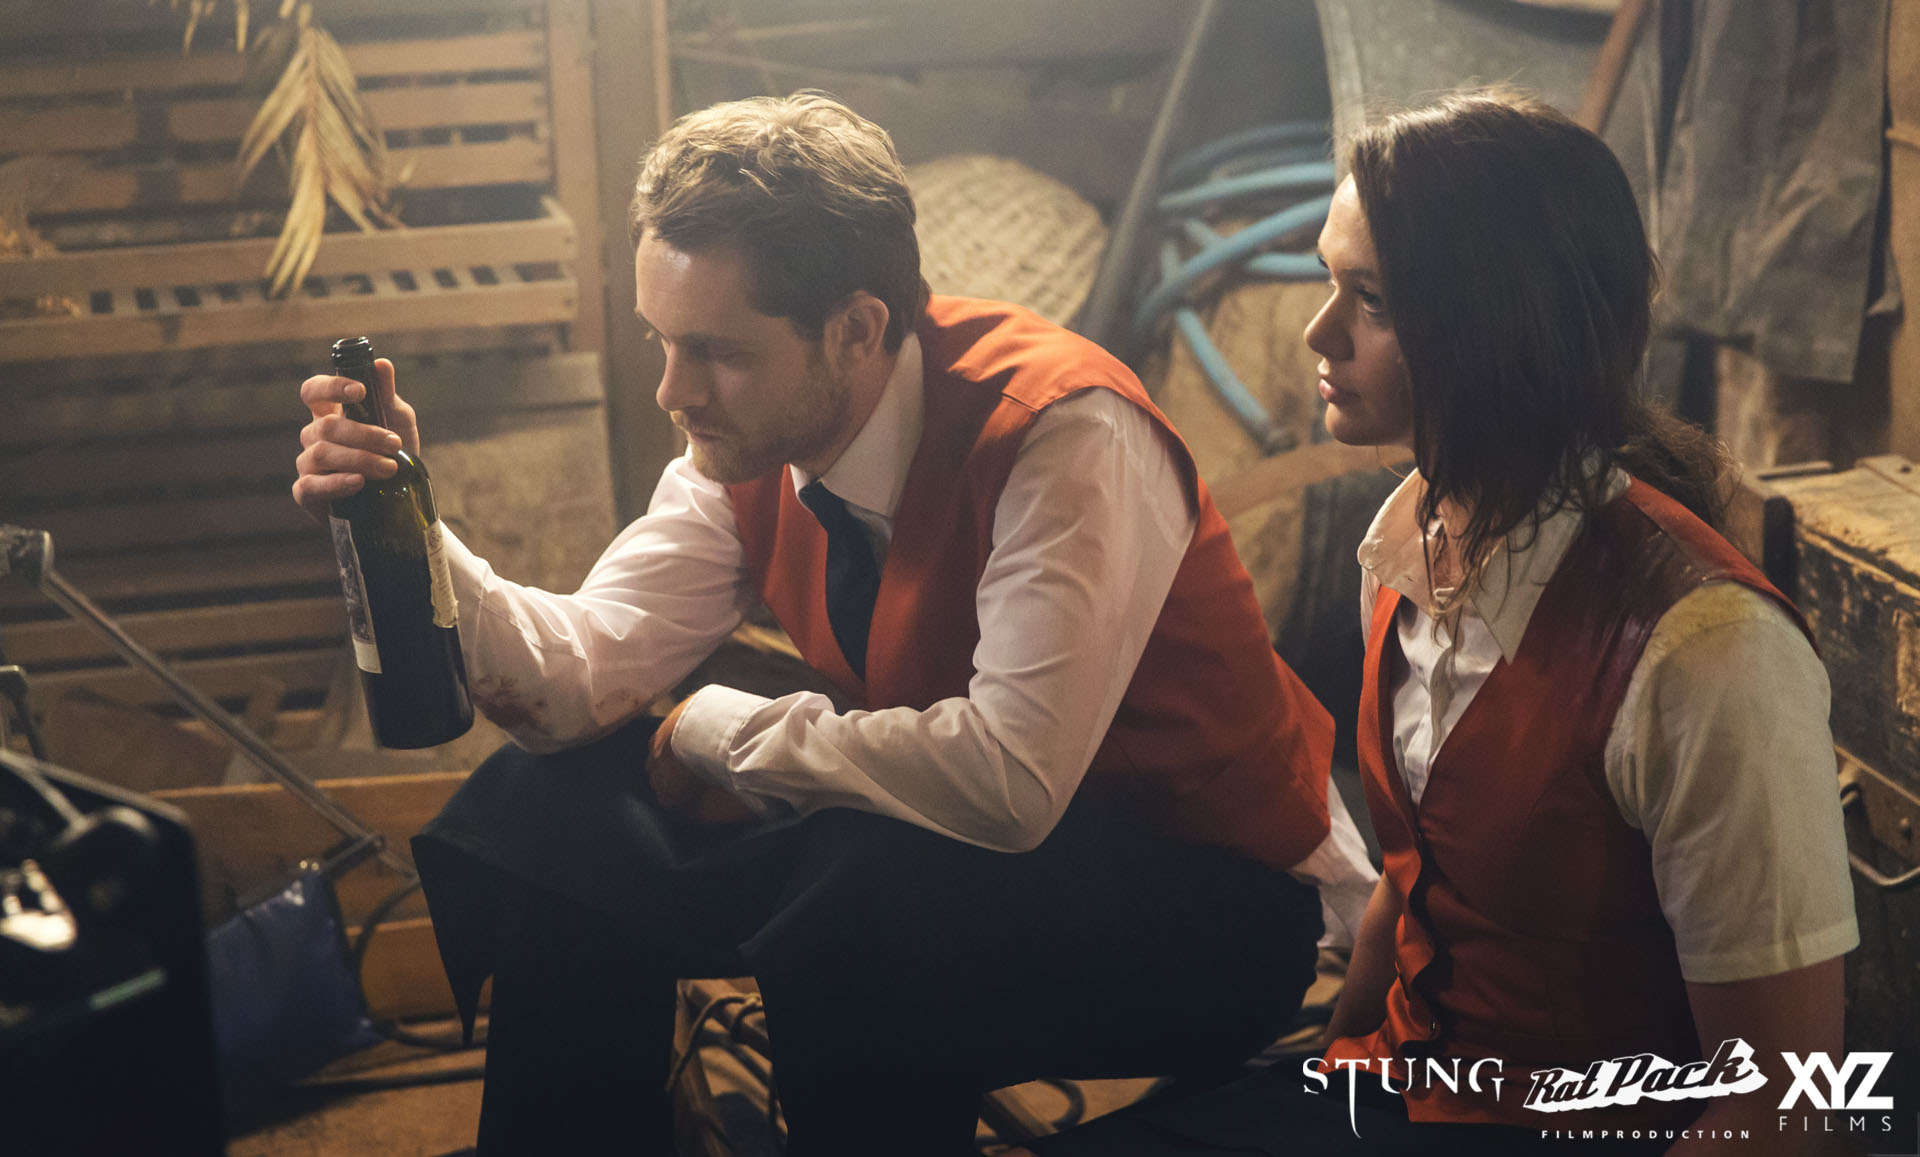 Jessica Cook and Matt O'Leary on the set of Stung.